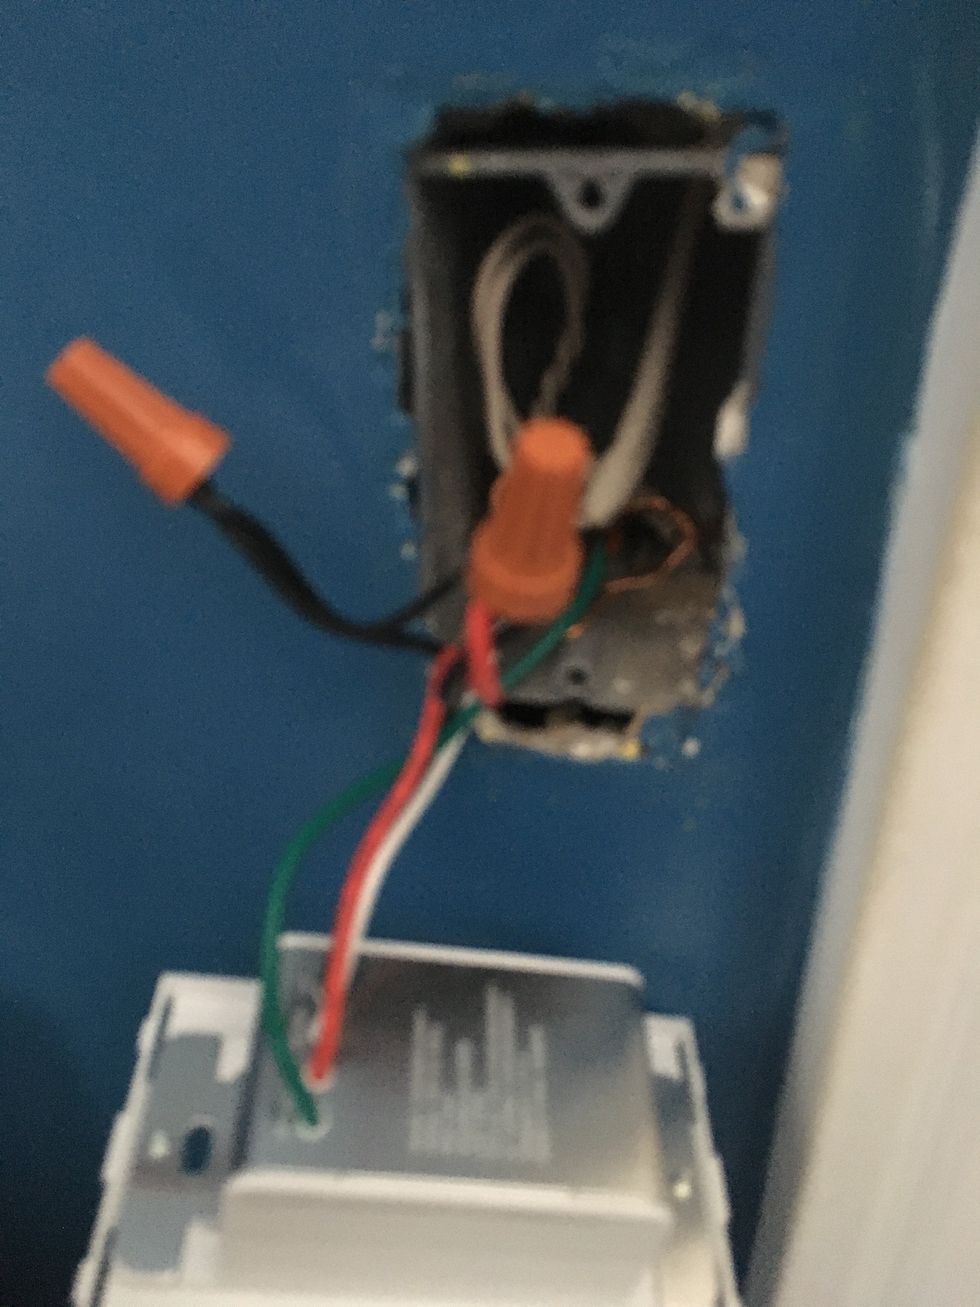 Take a picture of the wires prior to removing old switch